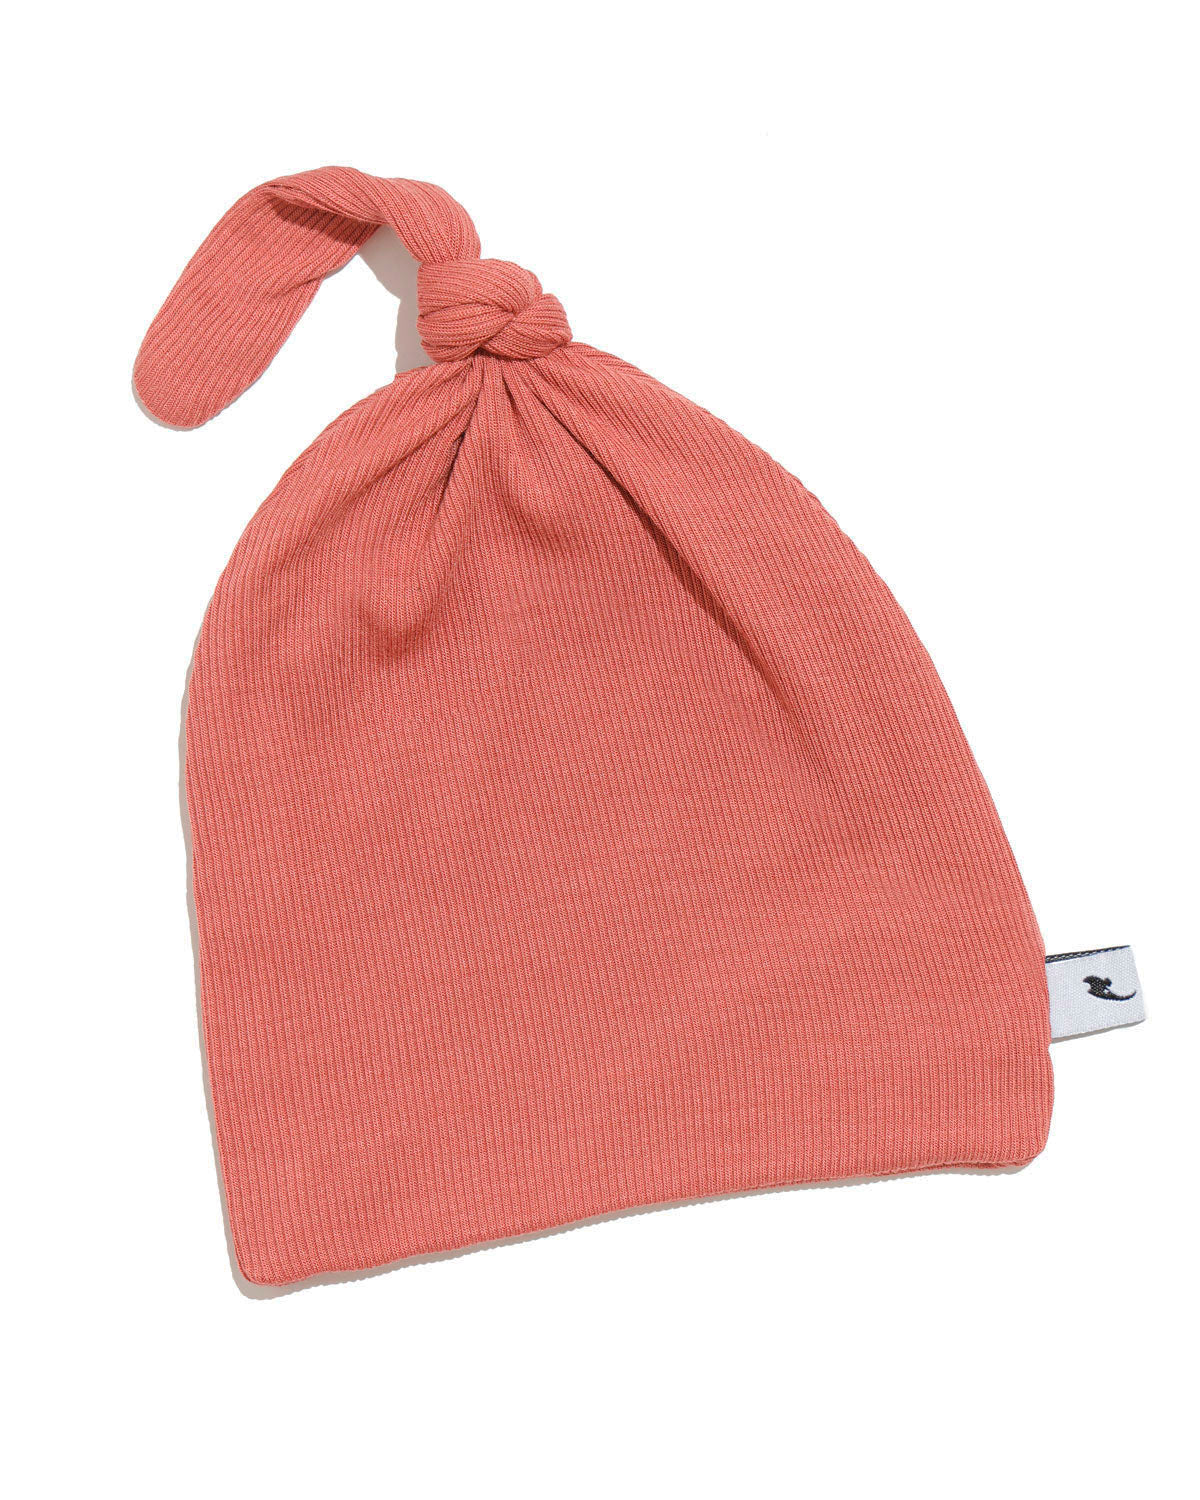 Rose ribbed top knot hat